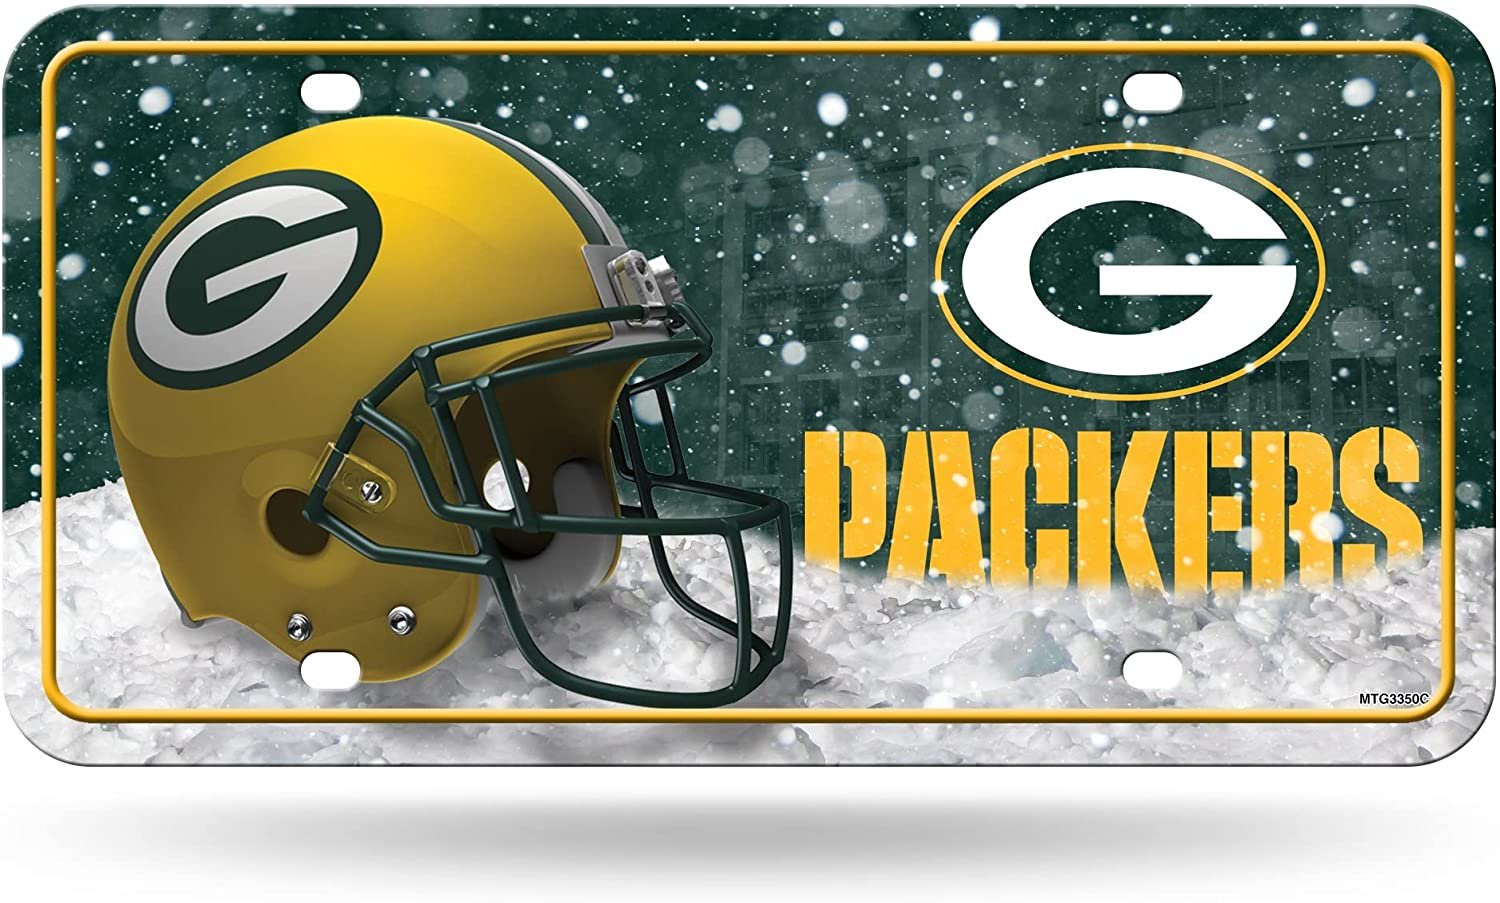 Green Bay Packers Metal Auto Tag License Plate, Snow Design, 6x12 Inch